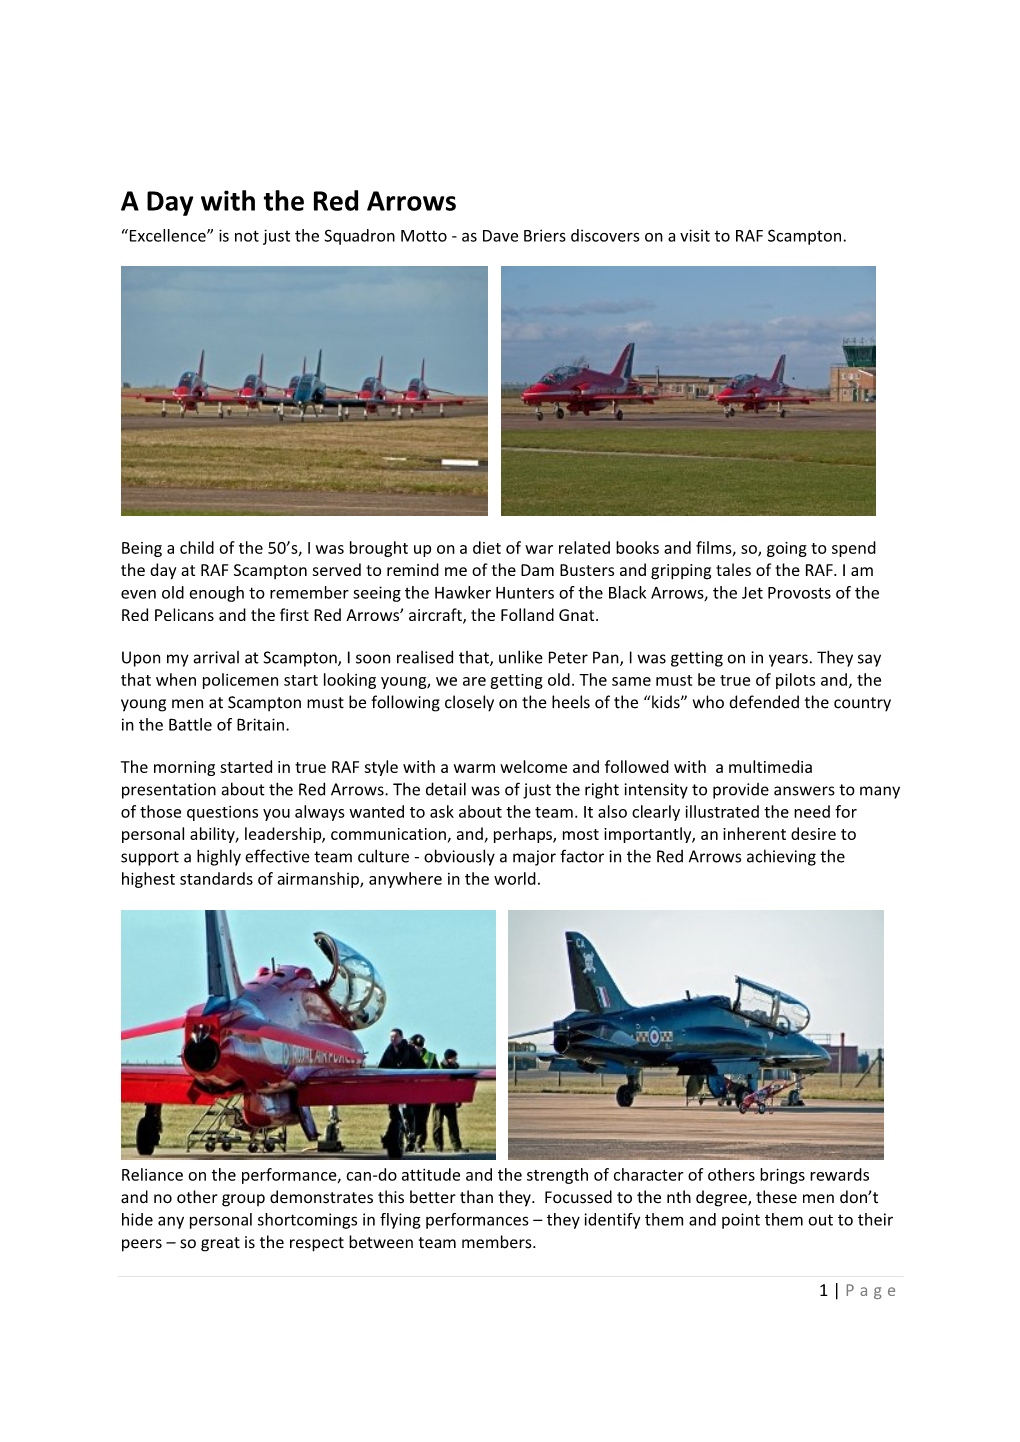 A Day with the Red Arrows “Excellence” Is Not Just the Squadron Motto - As Dave Briers Discovers on a Visit to RAF Scampton